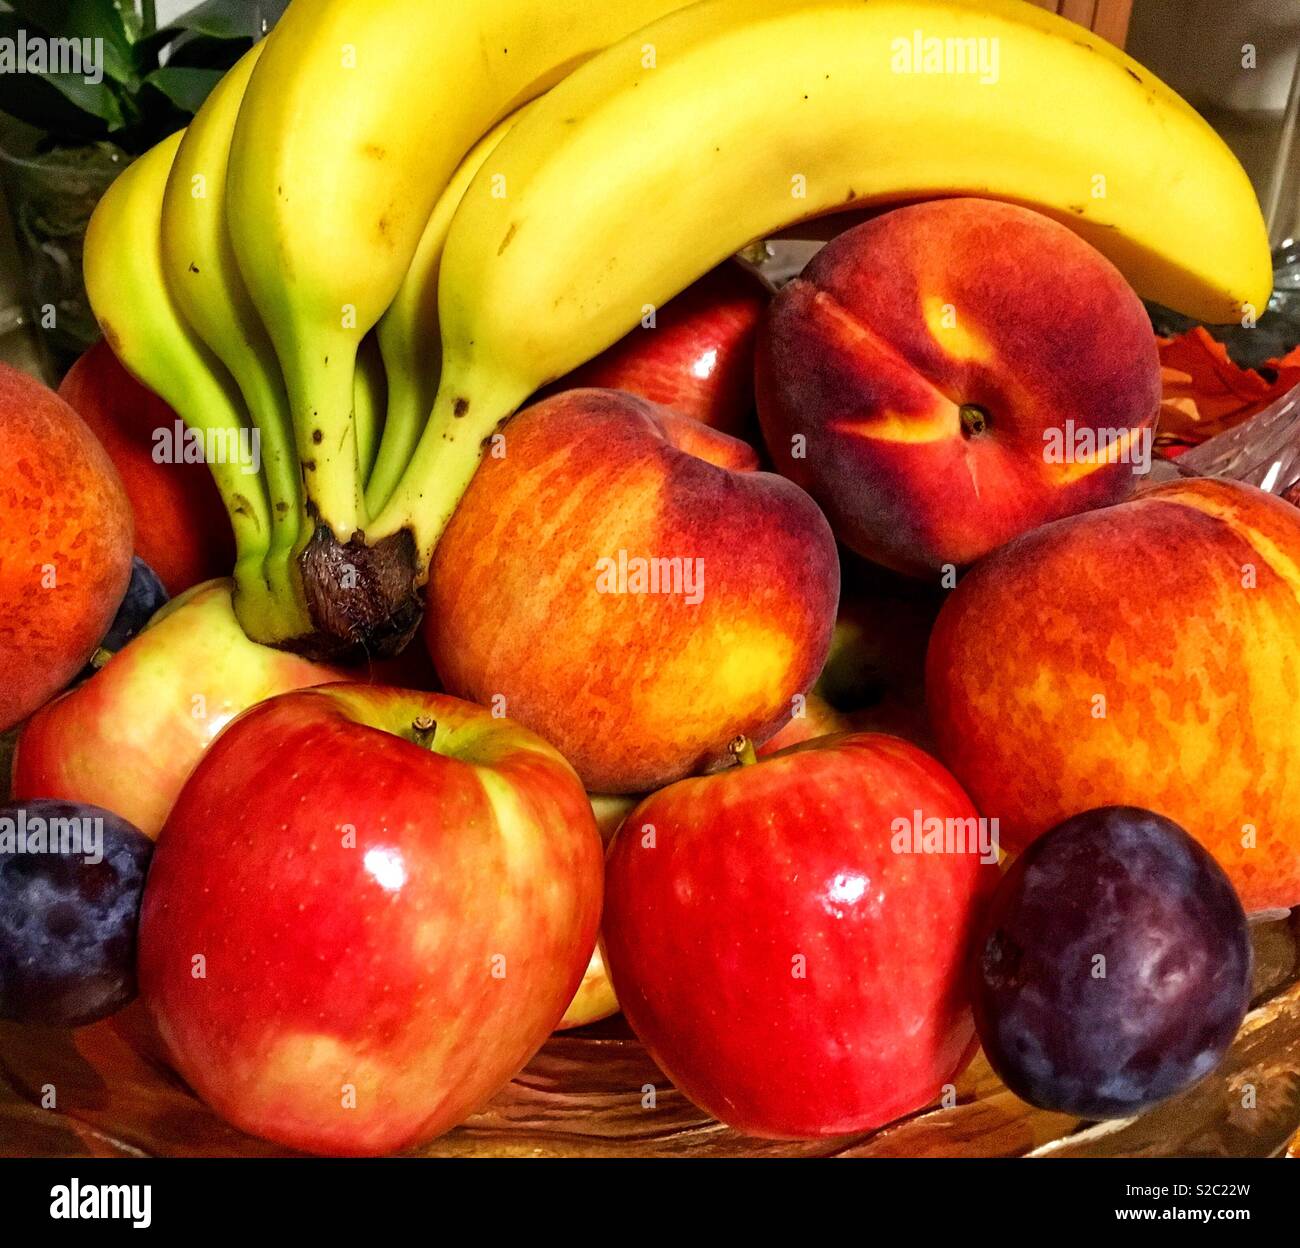 https://c8.alamy.com/comp/S2C22W/fruit-in-a-glass-bowl-including-a-bunch-of-bananas-red-and-green-mcintosh-apples-purple-plums-and-nectarines-S2C22W.jpg